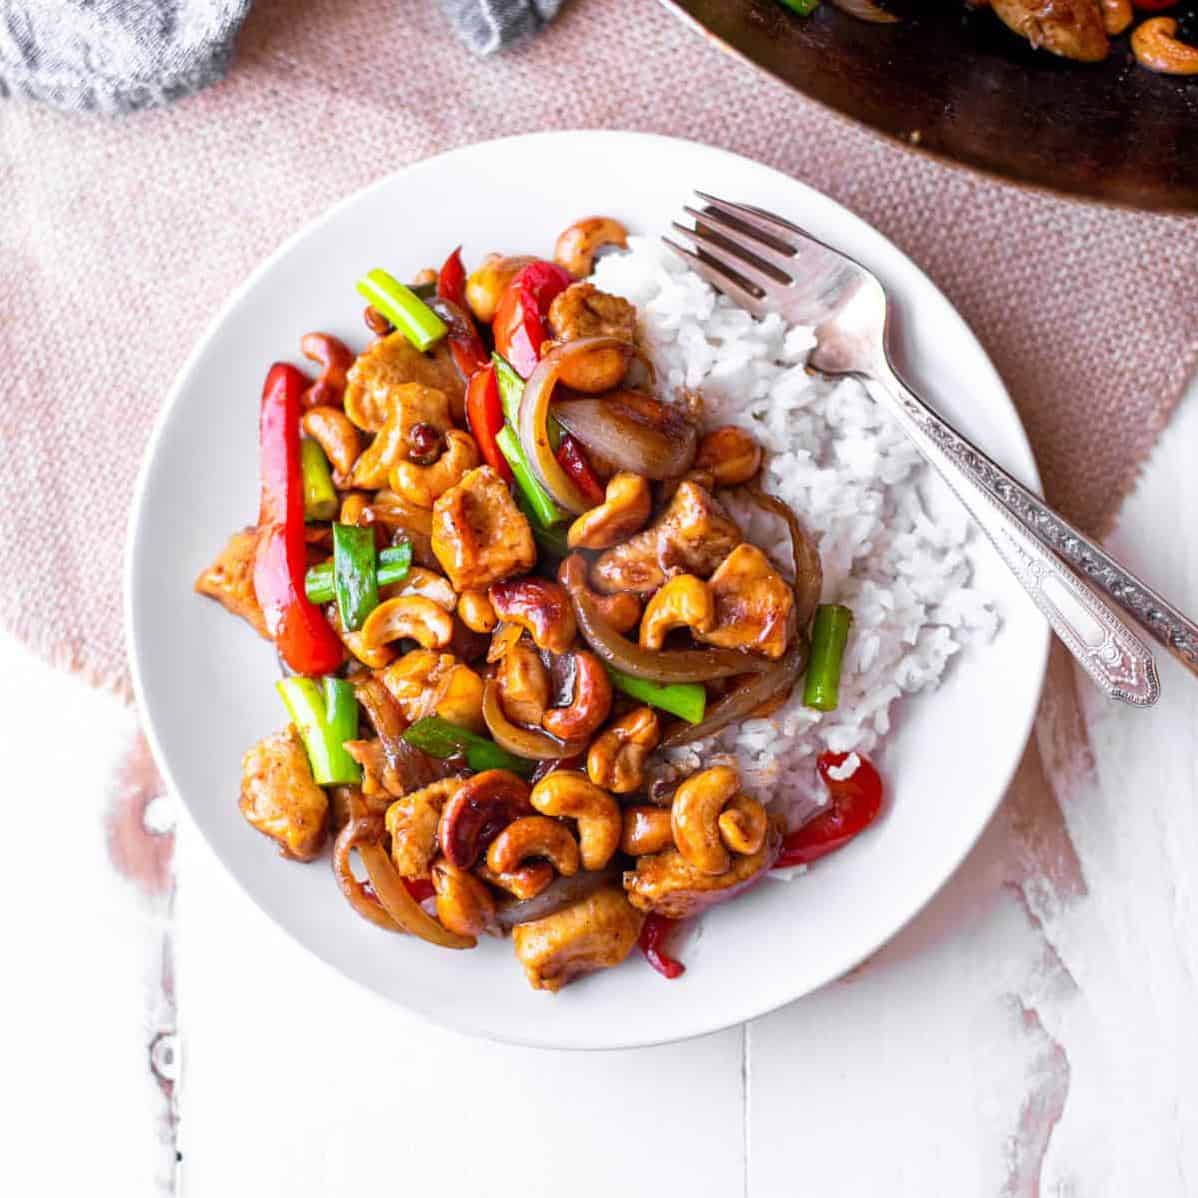  The aromatic smell of stir-fried chicken and veggies will get your mouth watering.